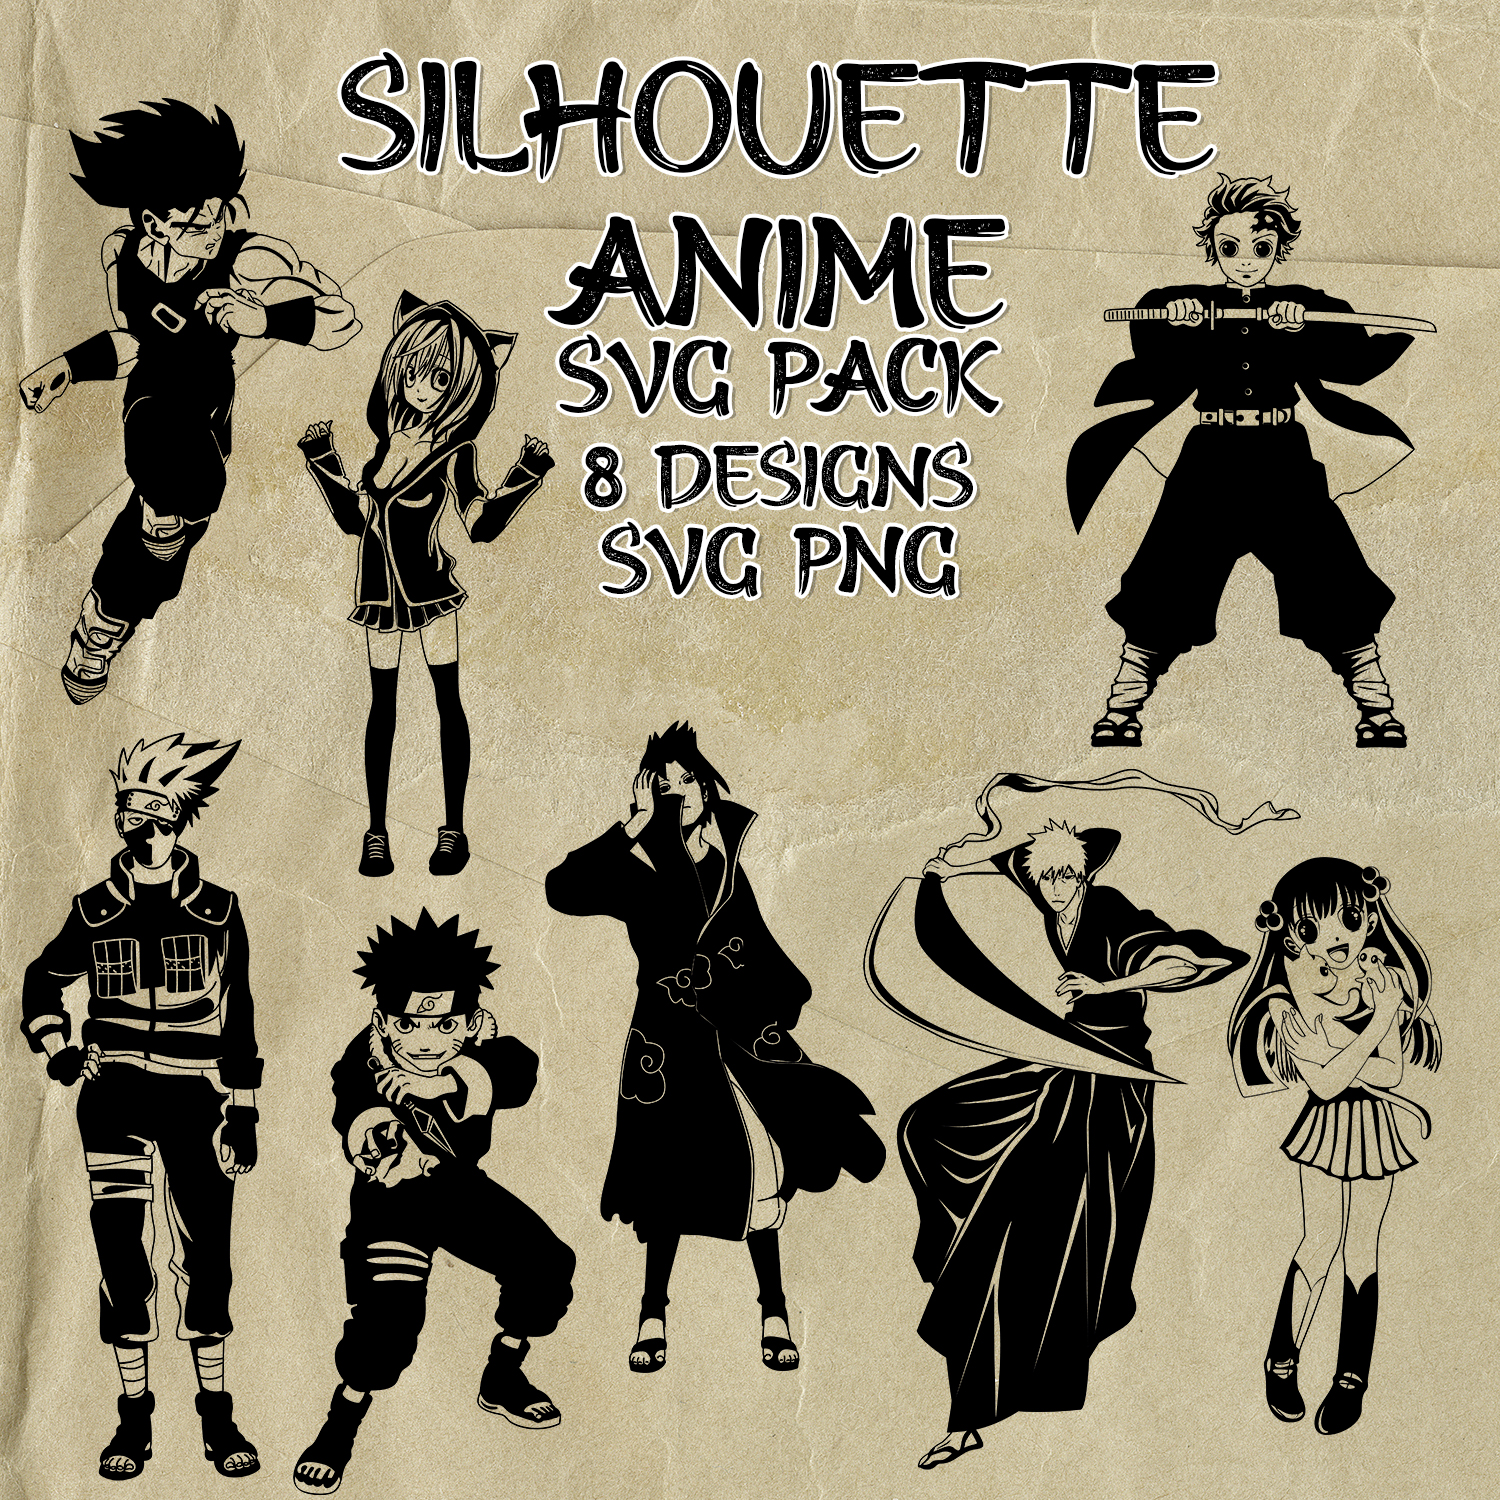 Images with silhouette anime.